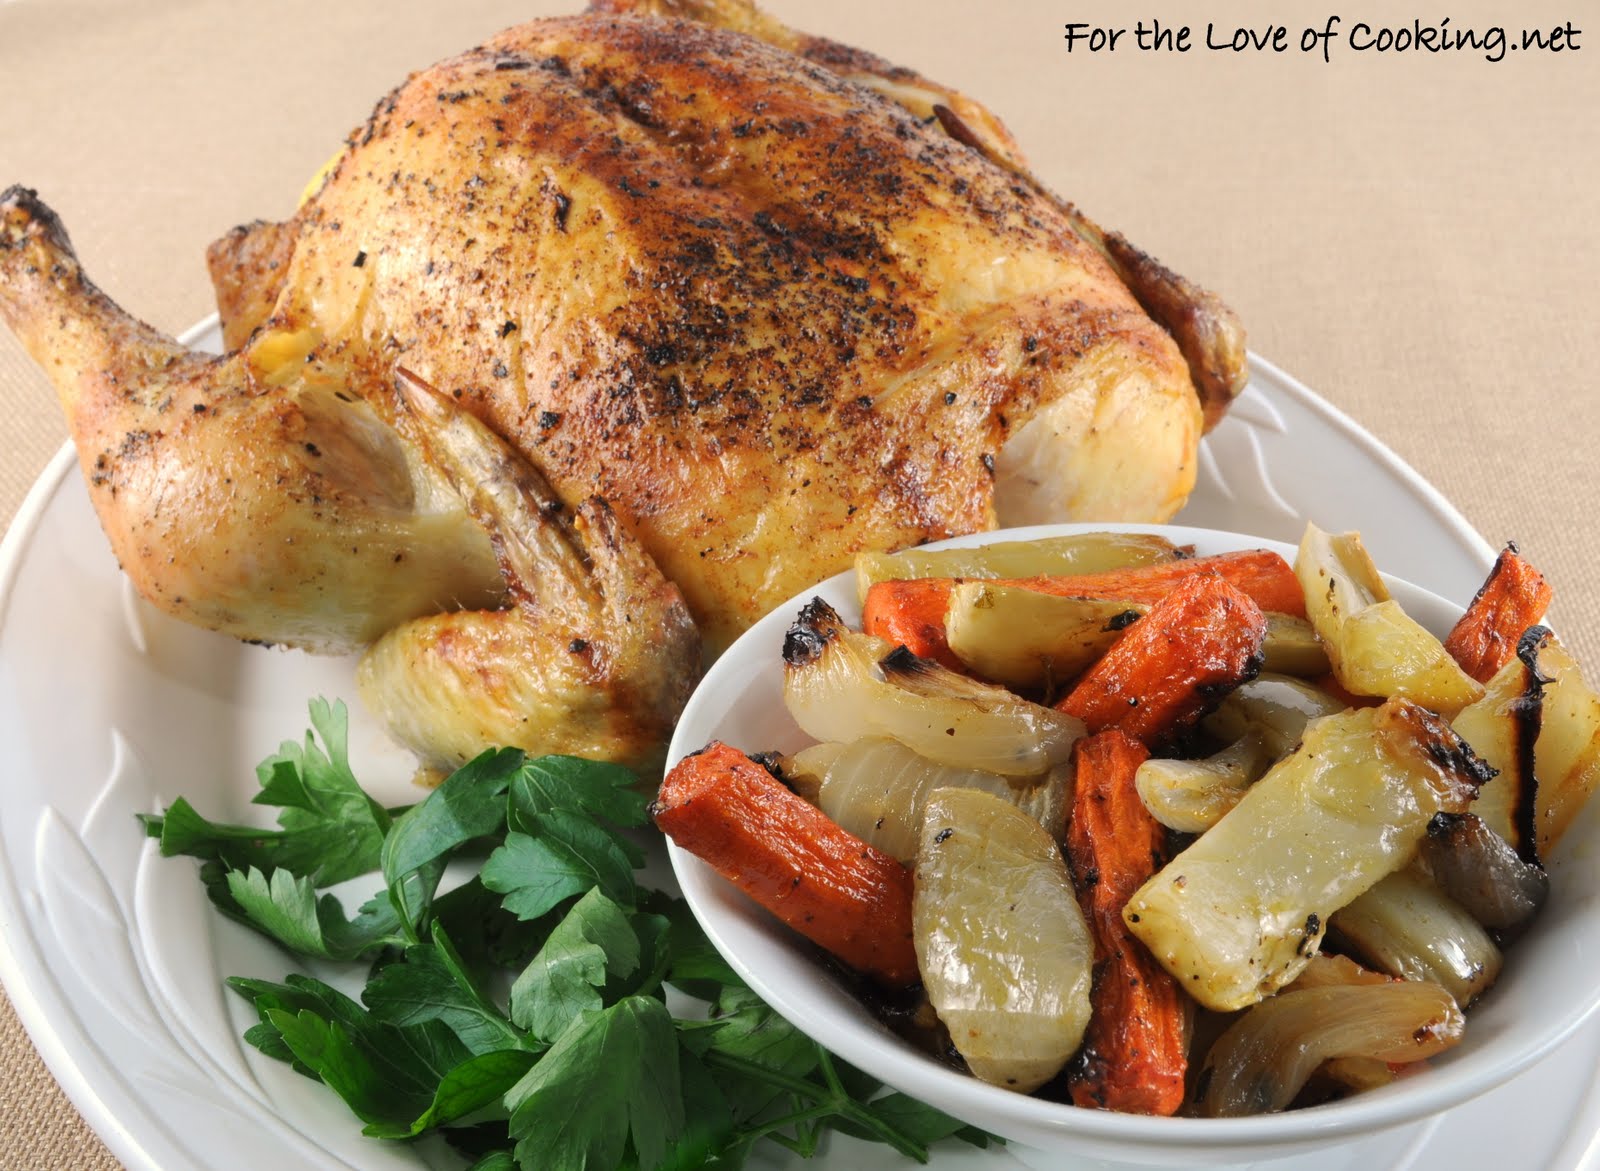 Roasted Chicken with Carrots, Fennel, and Onion | For the Love of Cooking